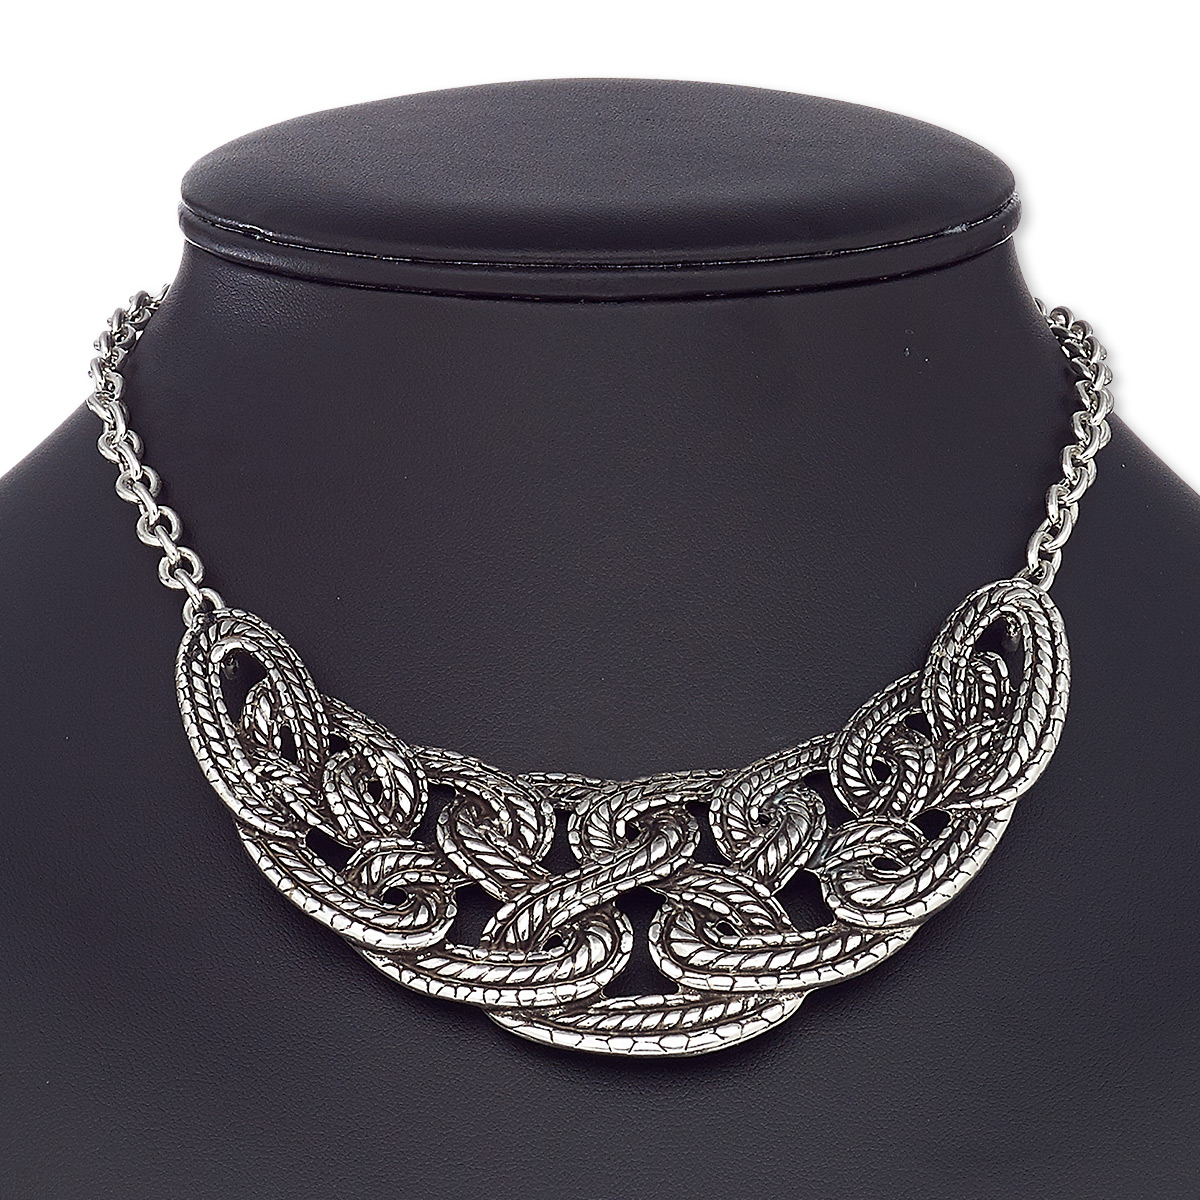 Necklace, antique silver-coated plastic with antique silver-plated ...